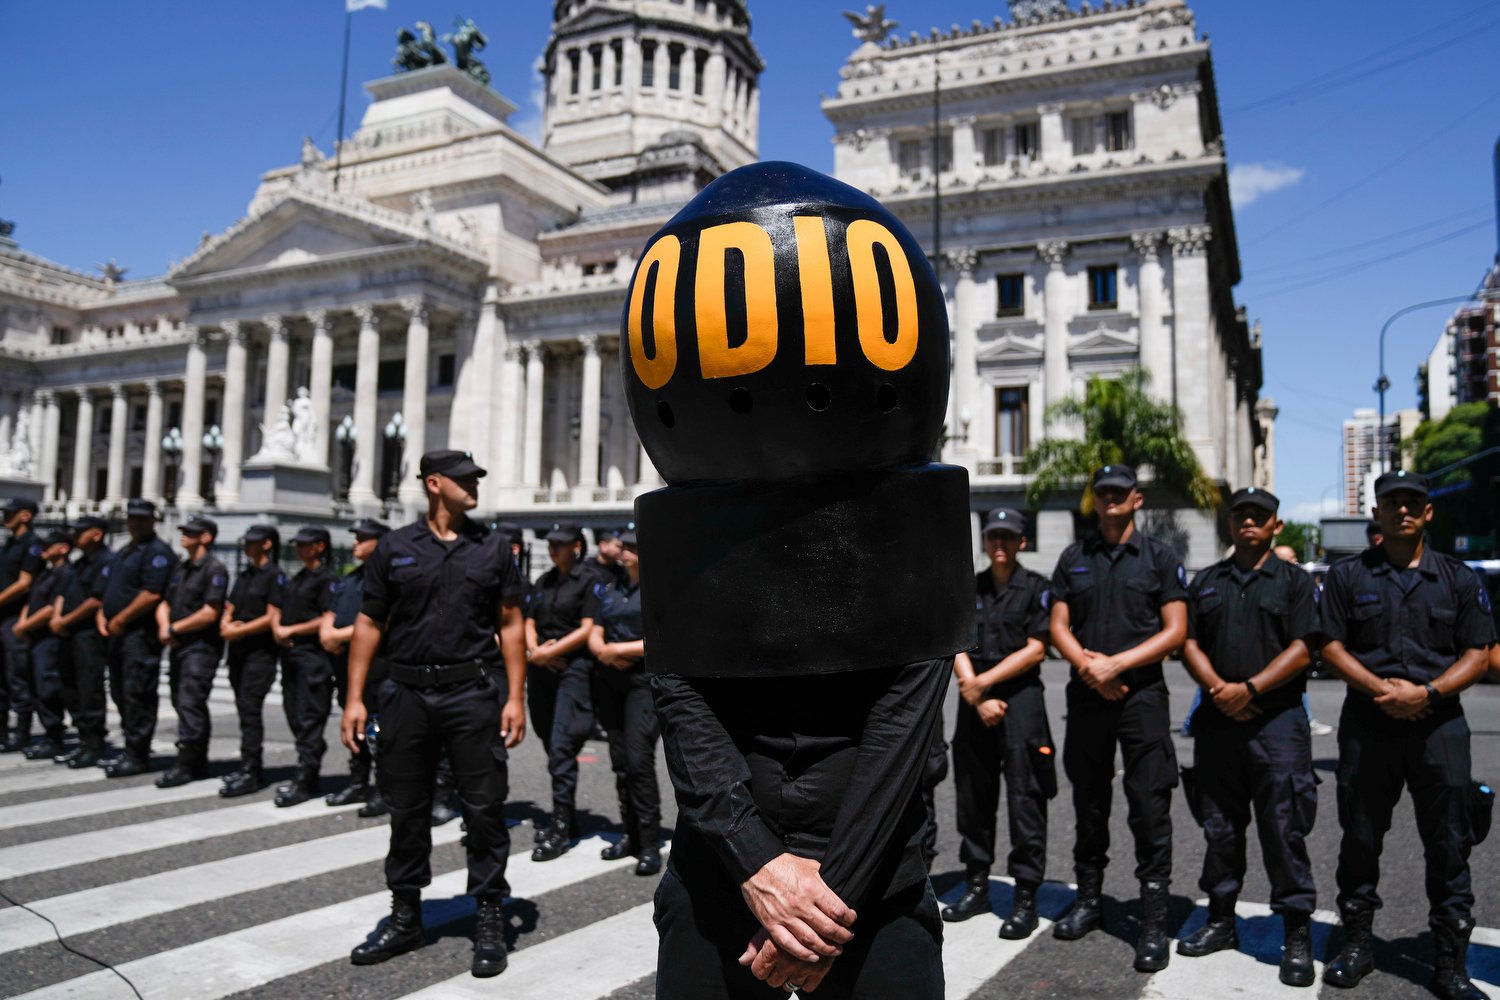  A demonstrator wearing the Spanish word "Hate" stands in front of police standing guard outside Congress as protesters rally during a national strike against the economic and labor reforms proposed by Argentine President Javier Milei in Buenos Aires